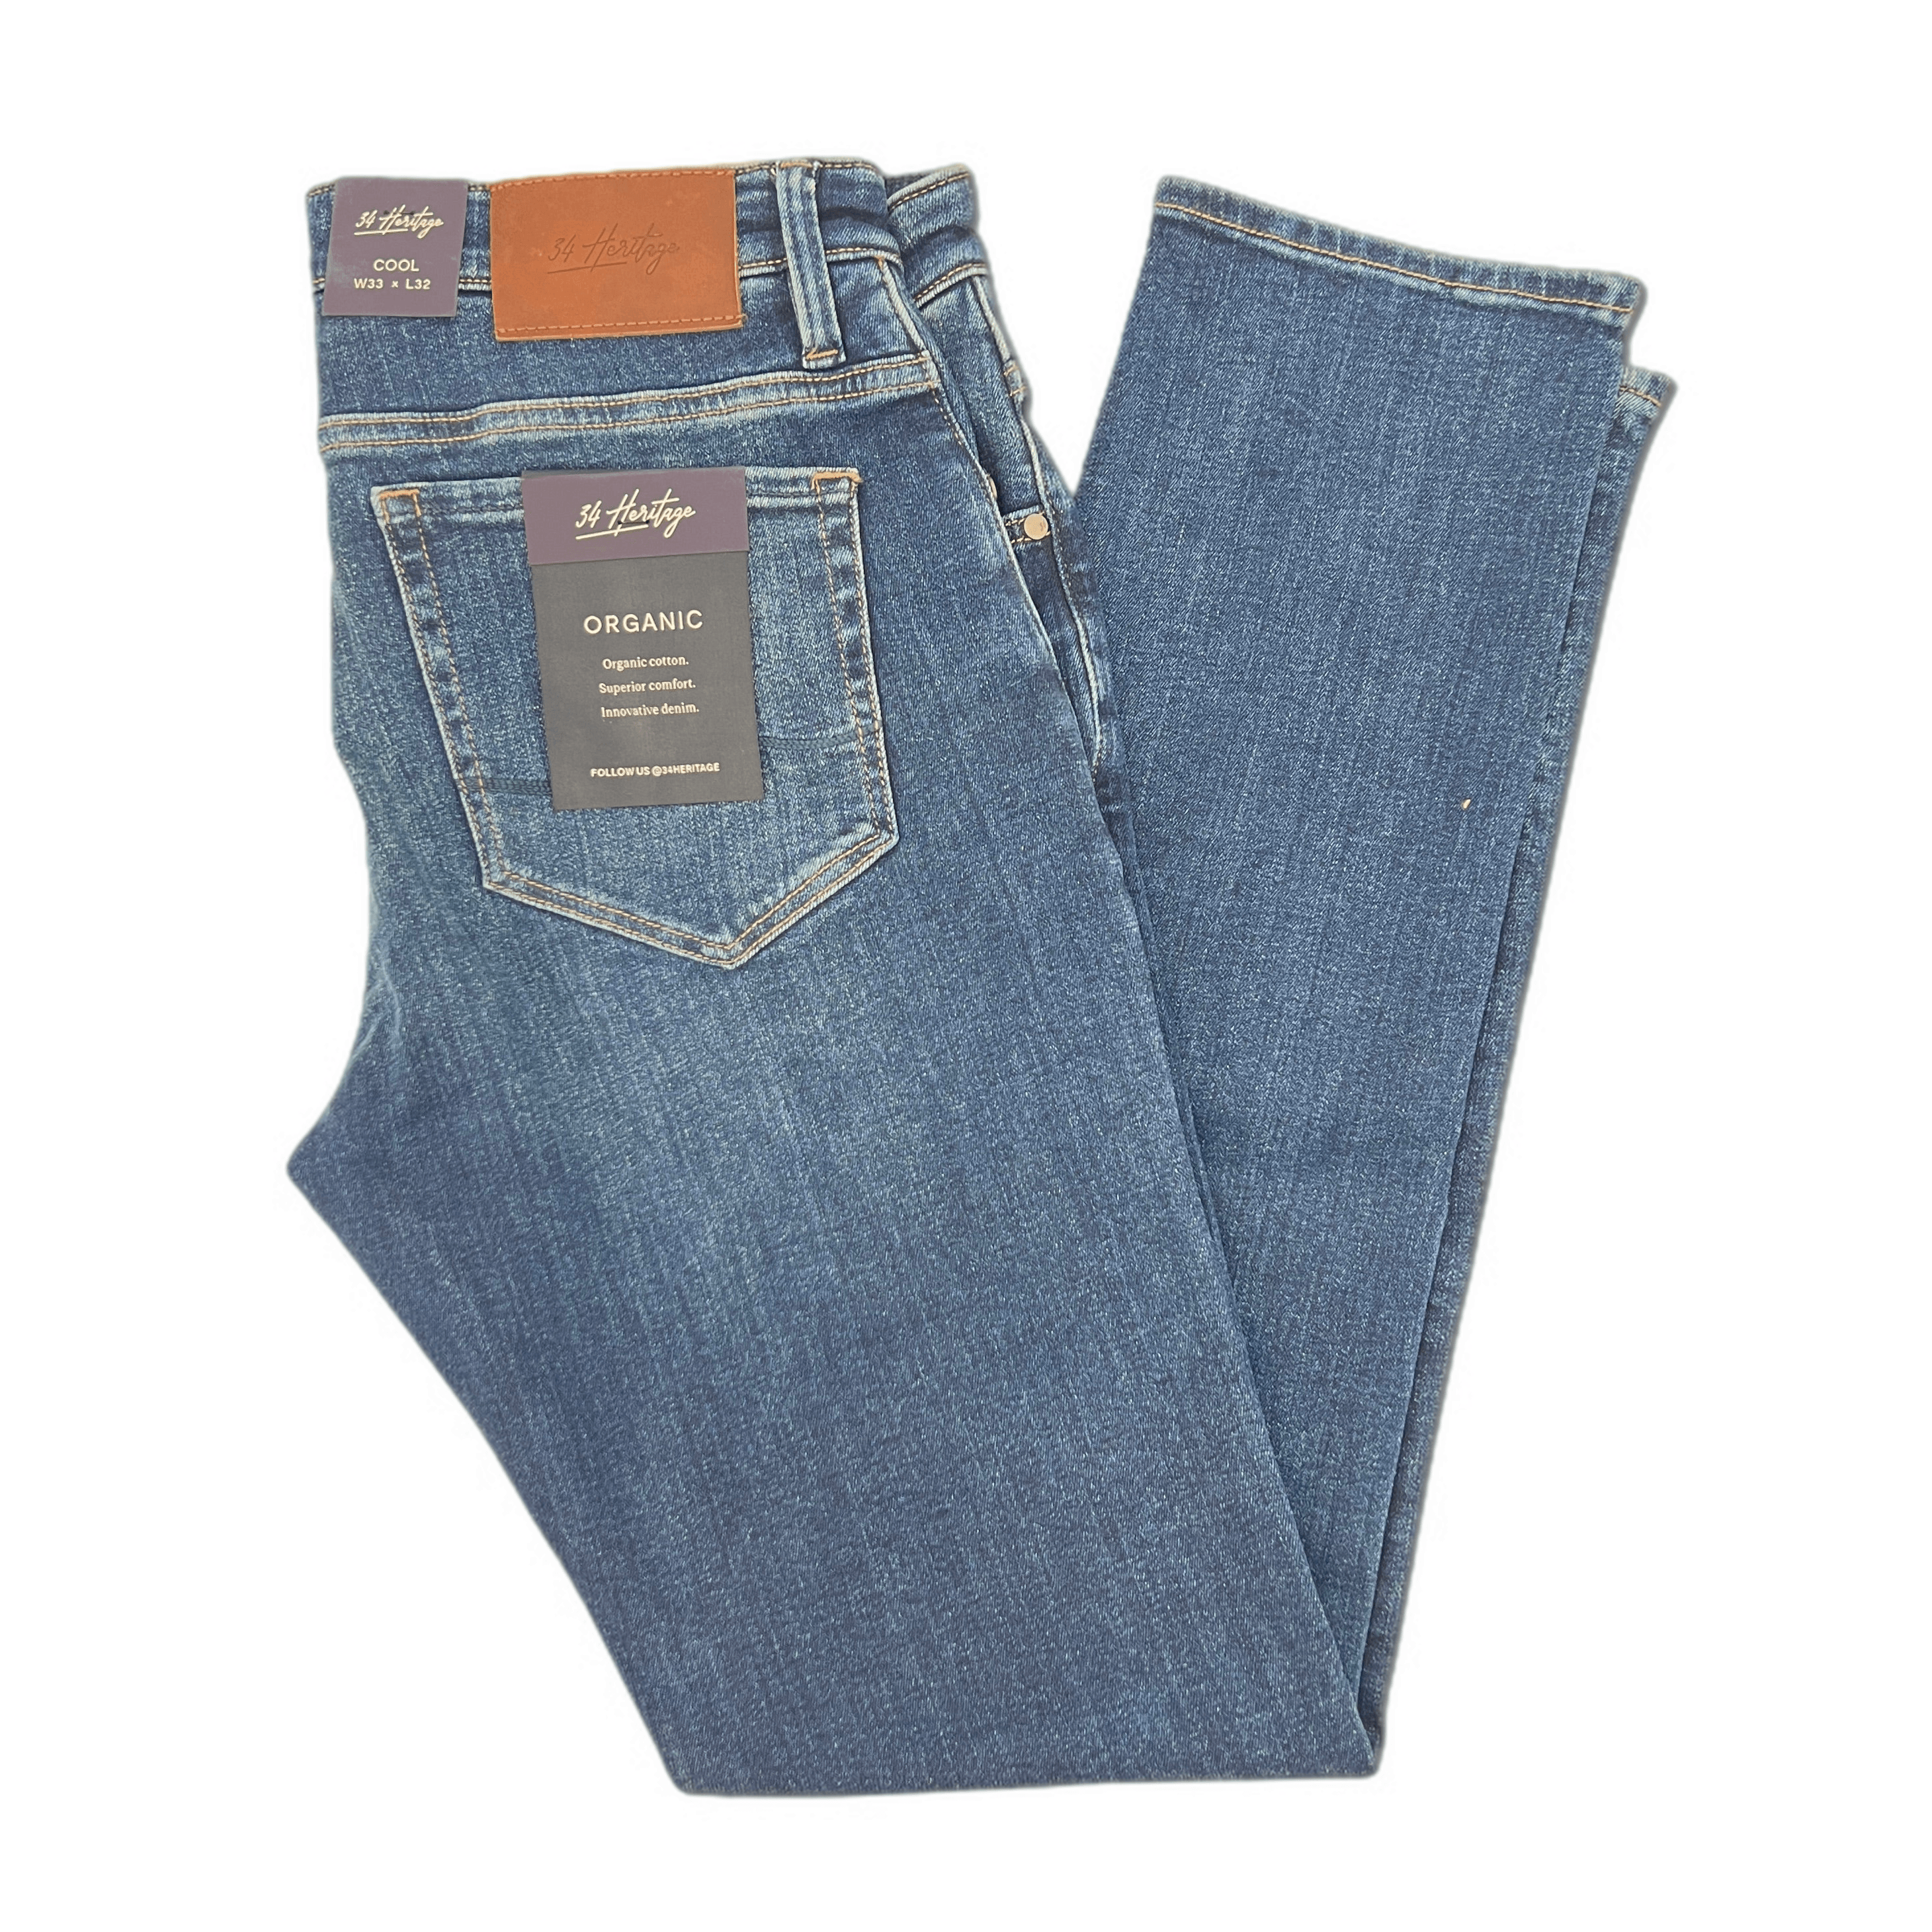 Laflamme- Jeans cool - 34 Heritage